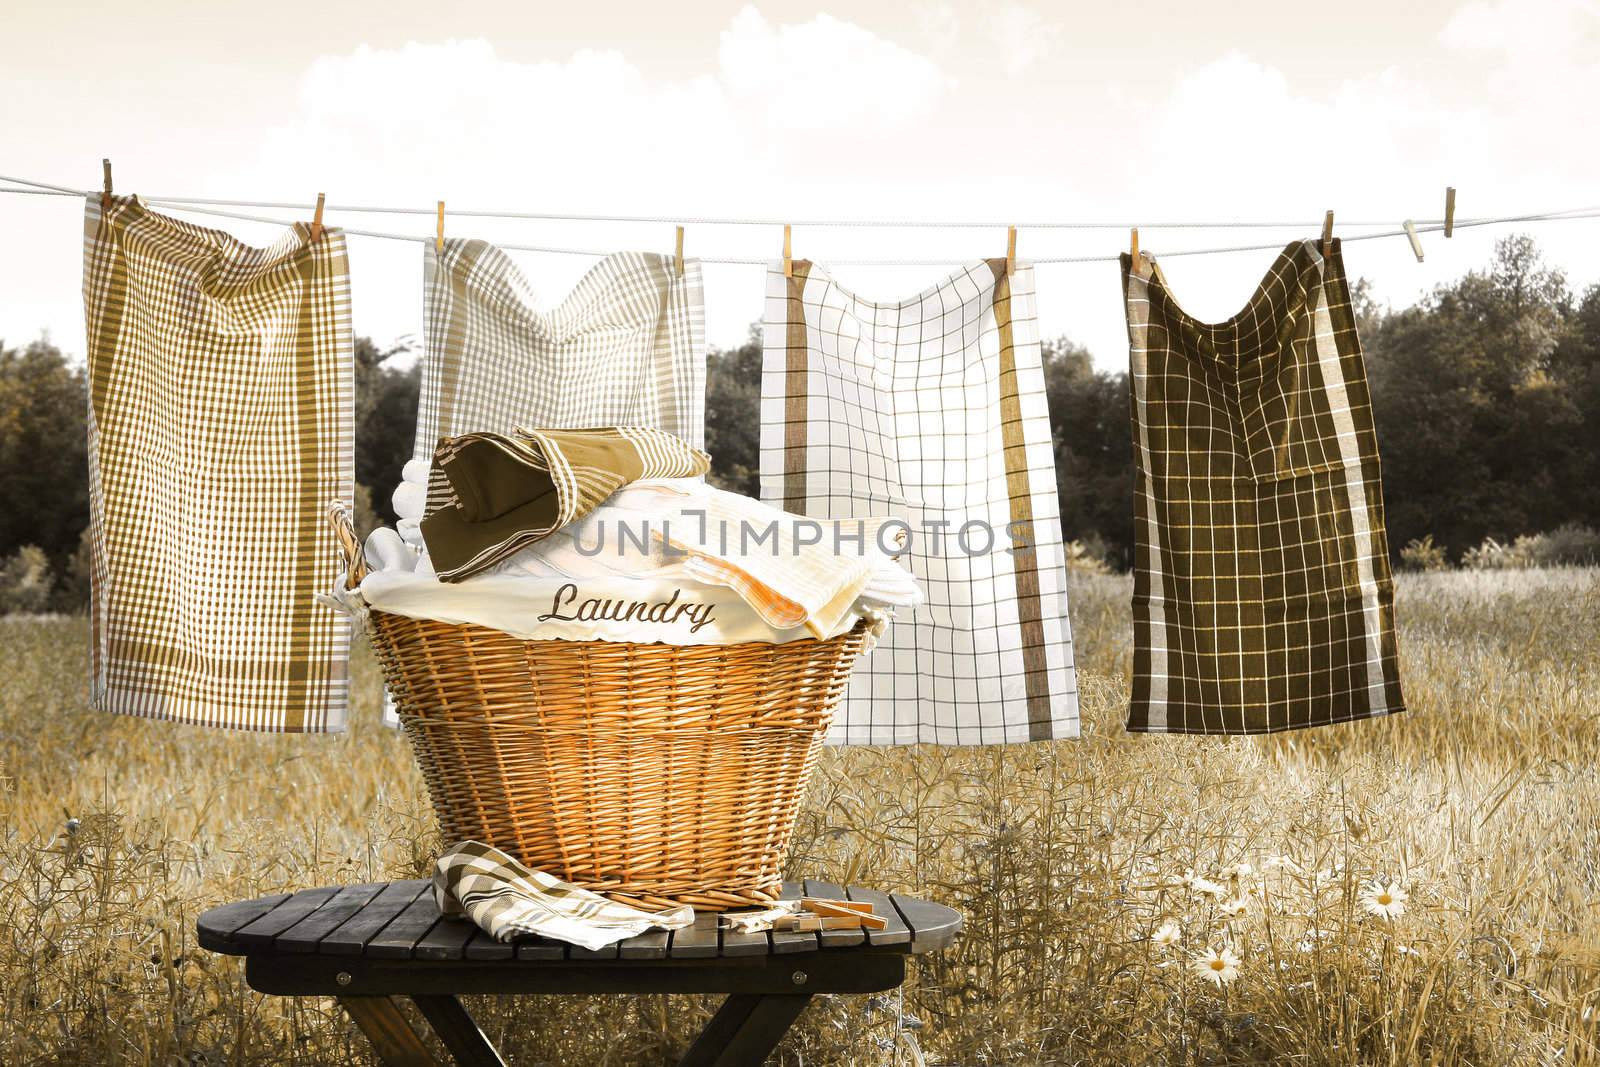 Towels drying on the clothesline by Sandralise